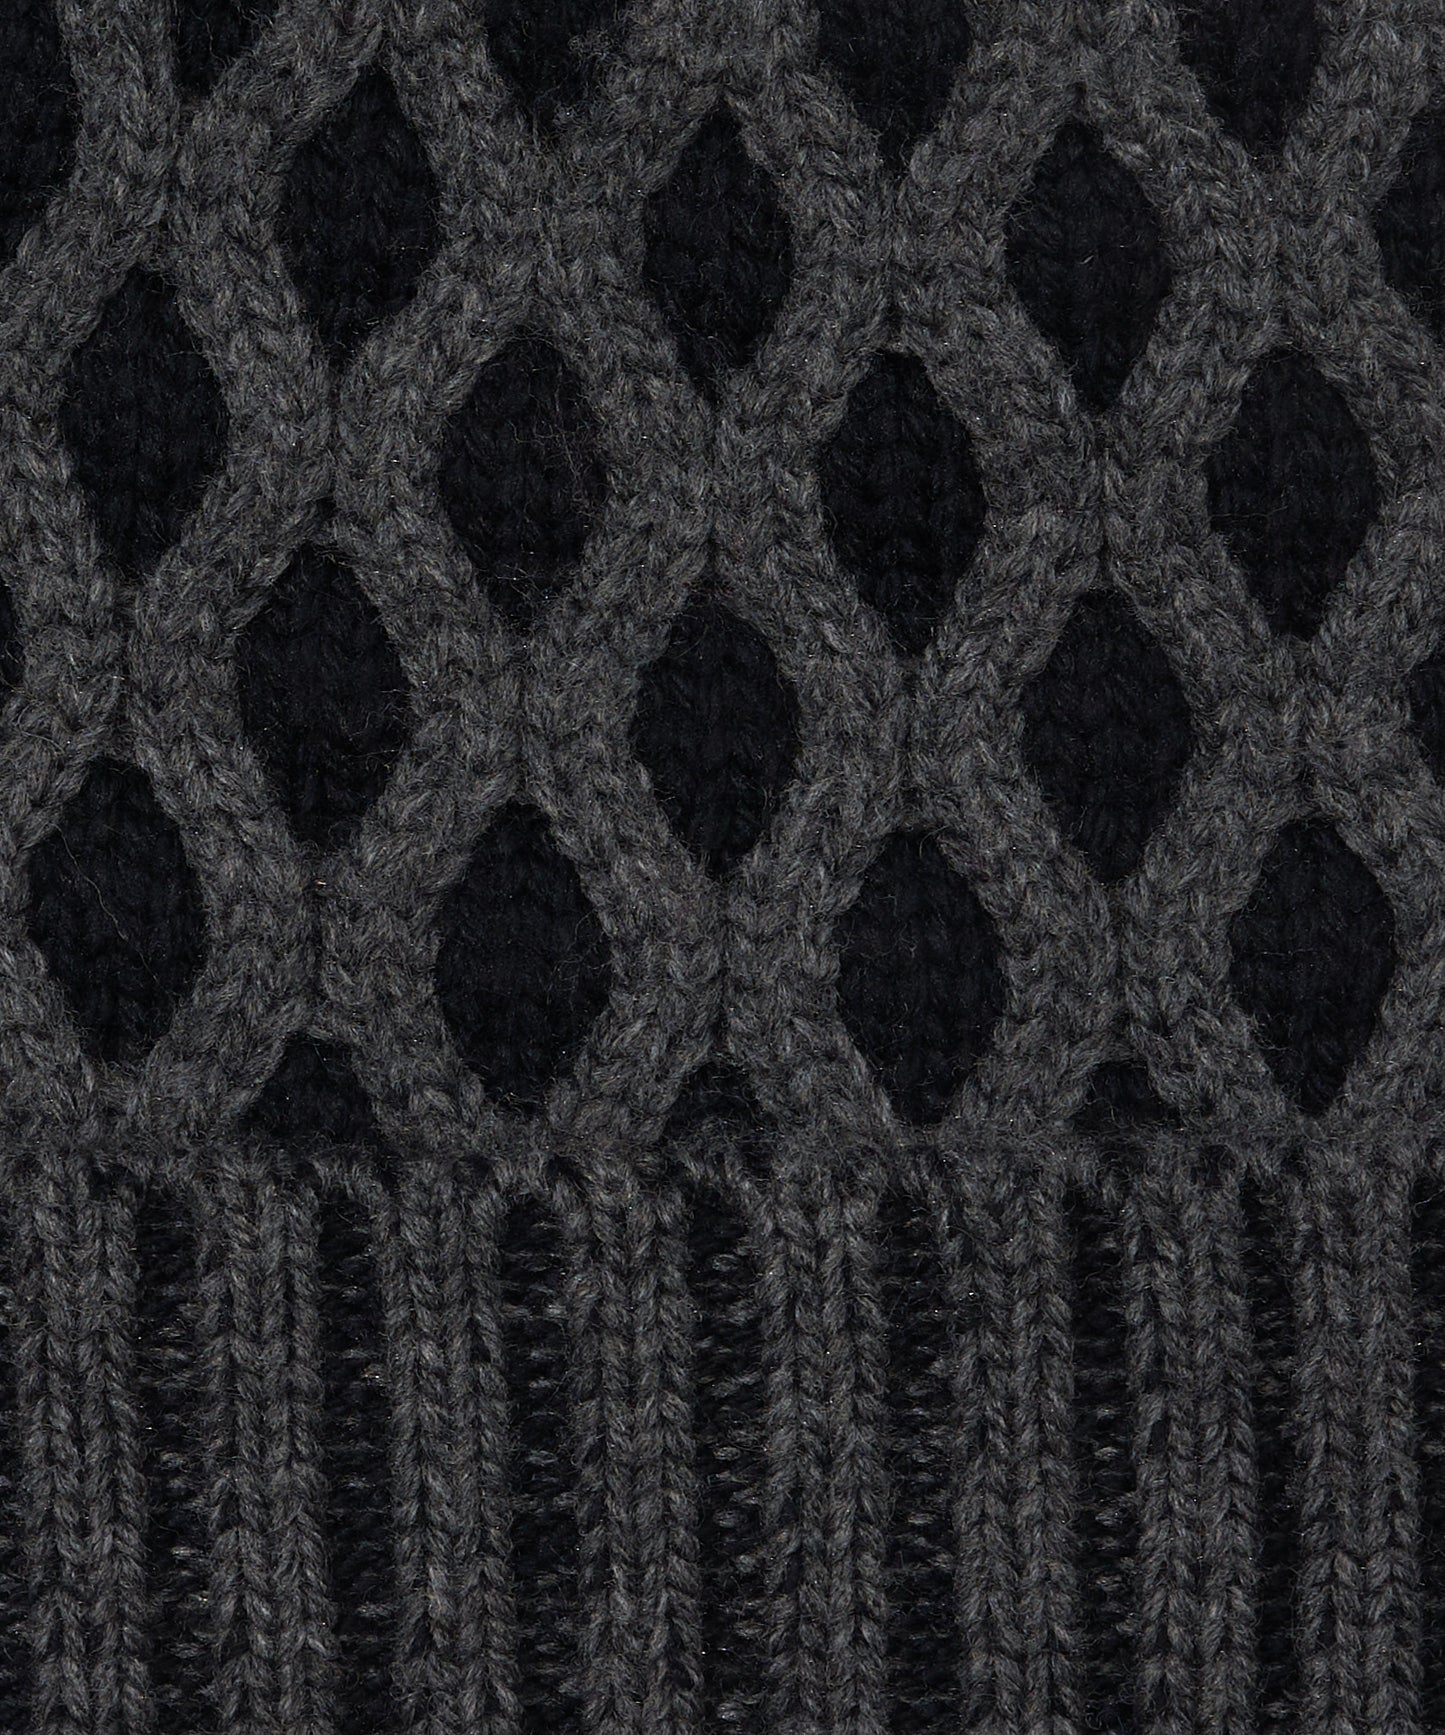 Recycled Bi-color Honeycomb Beanie in color Black/Charcoal